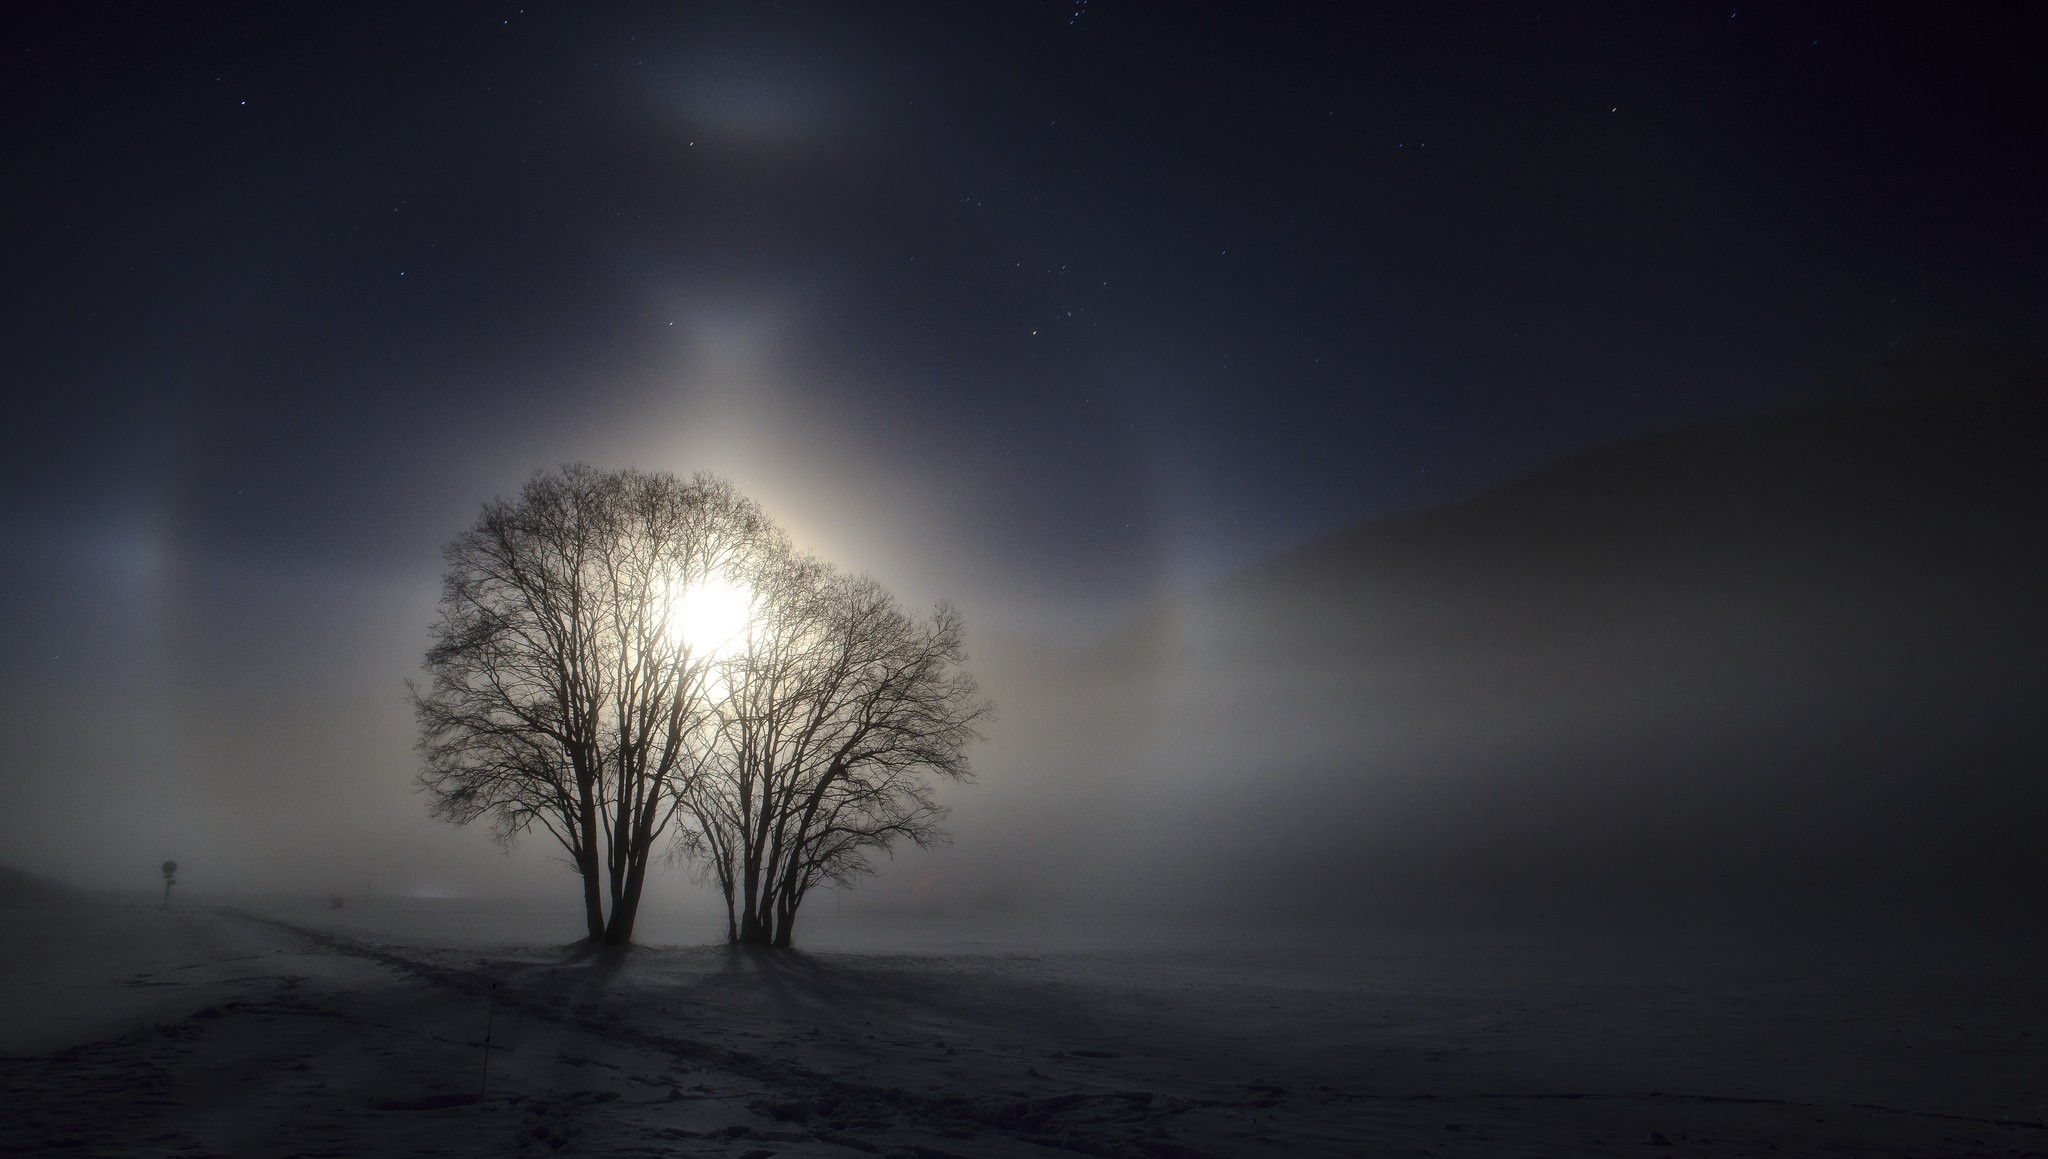 General 2048x1159 nature photography landscape moonlight circle mist starry night hills trees path atmosphere